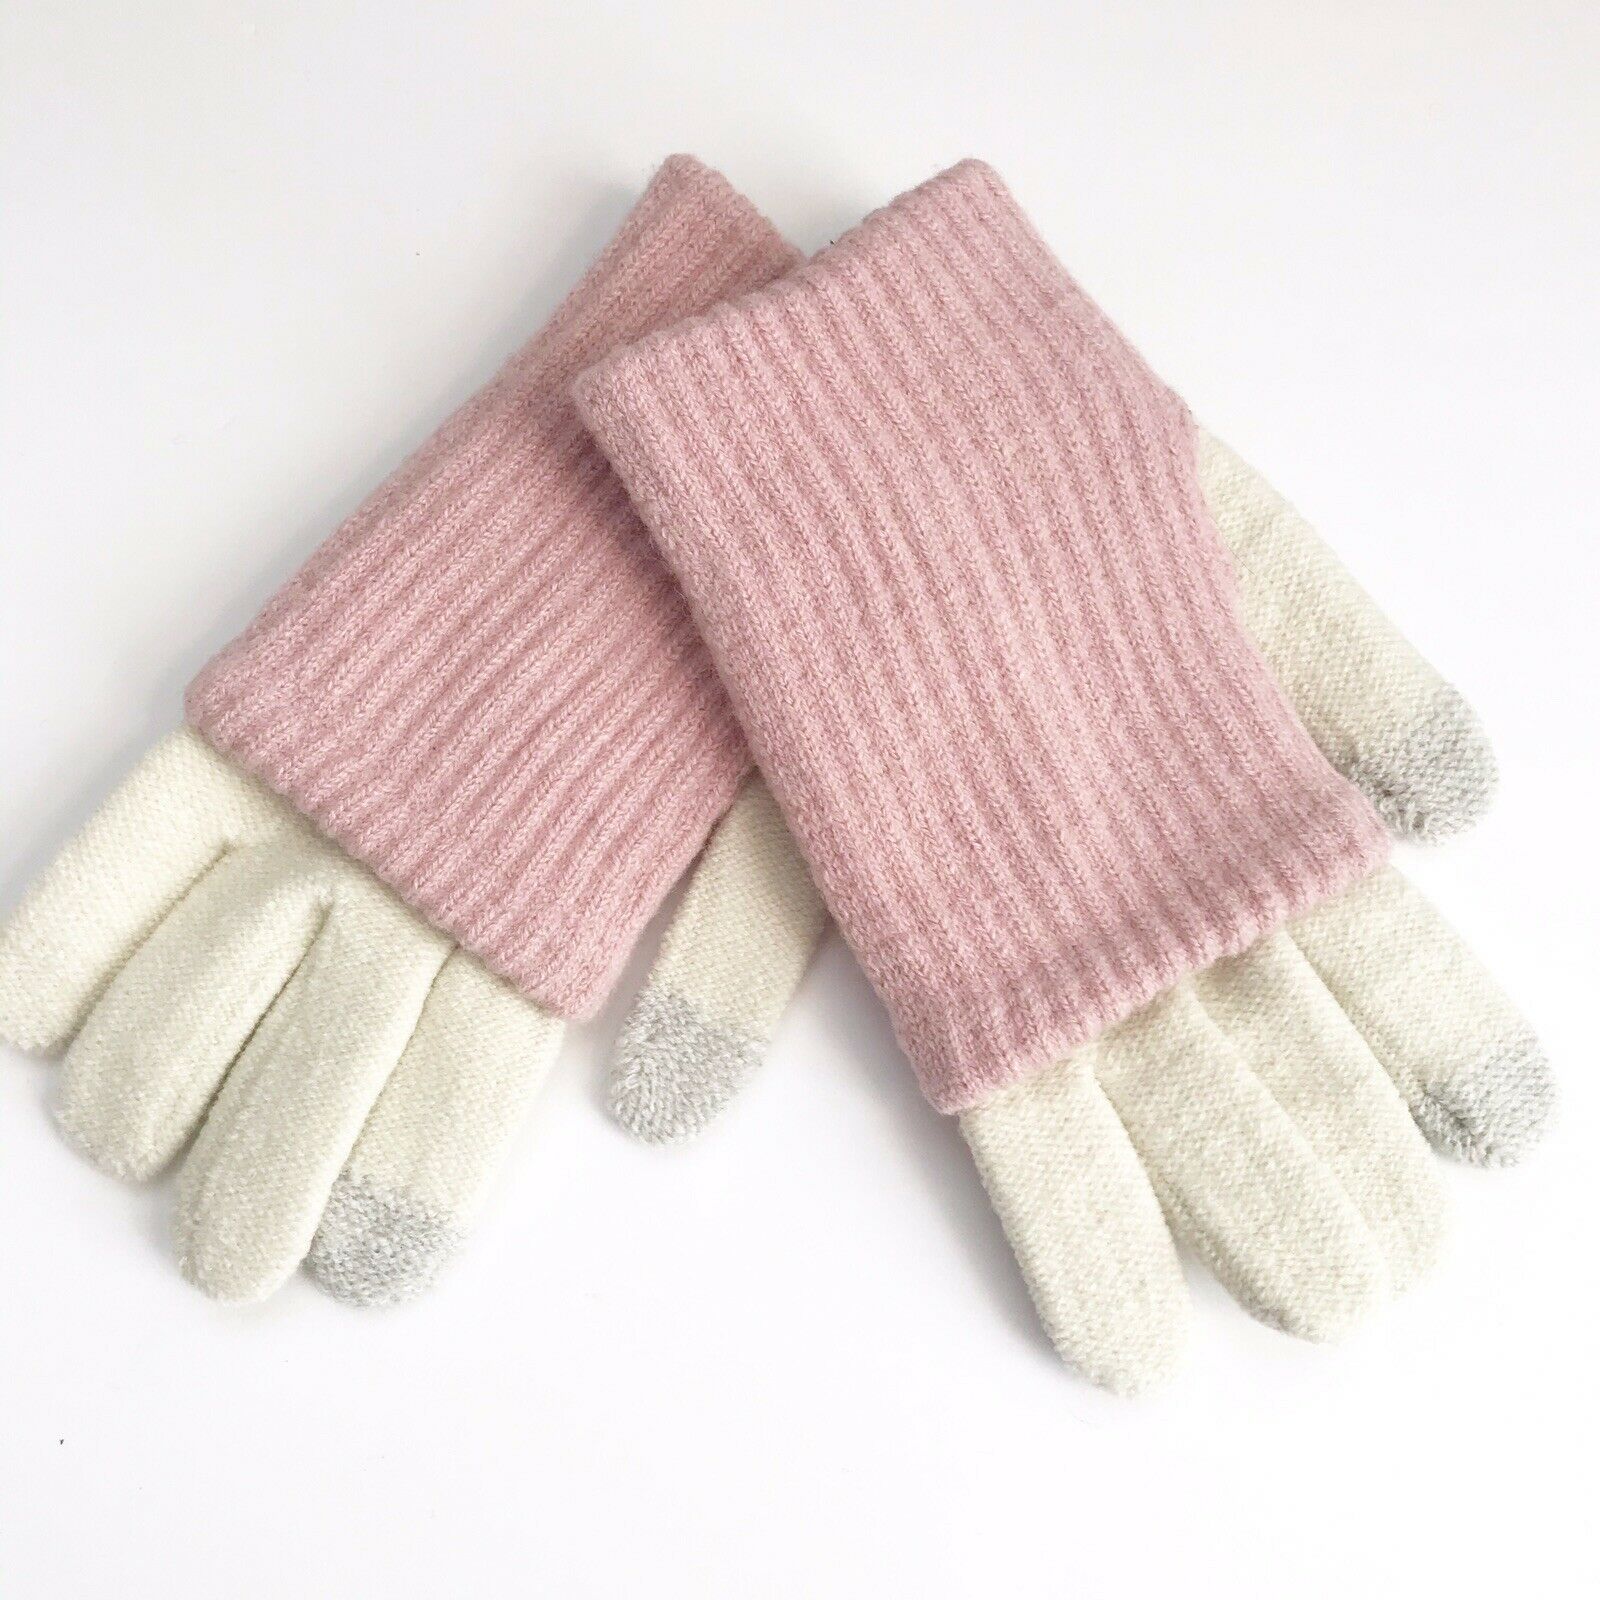 Steve Madden NWT Women's Layered Look Tech Gloves in Cream and Pink